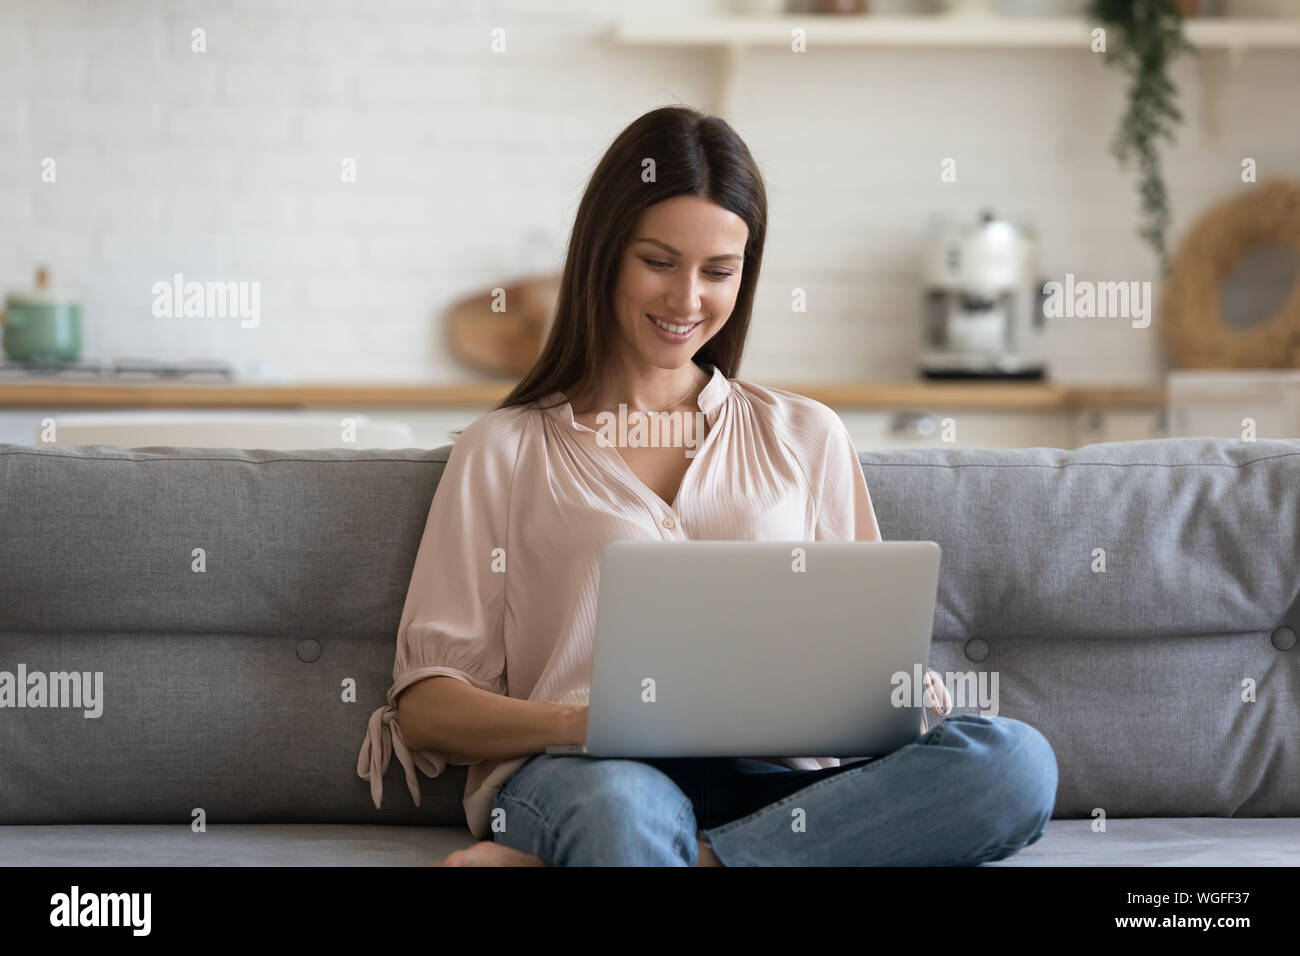 Woman looking at computer screen resting on couch at home Stock Photo